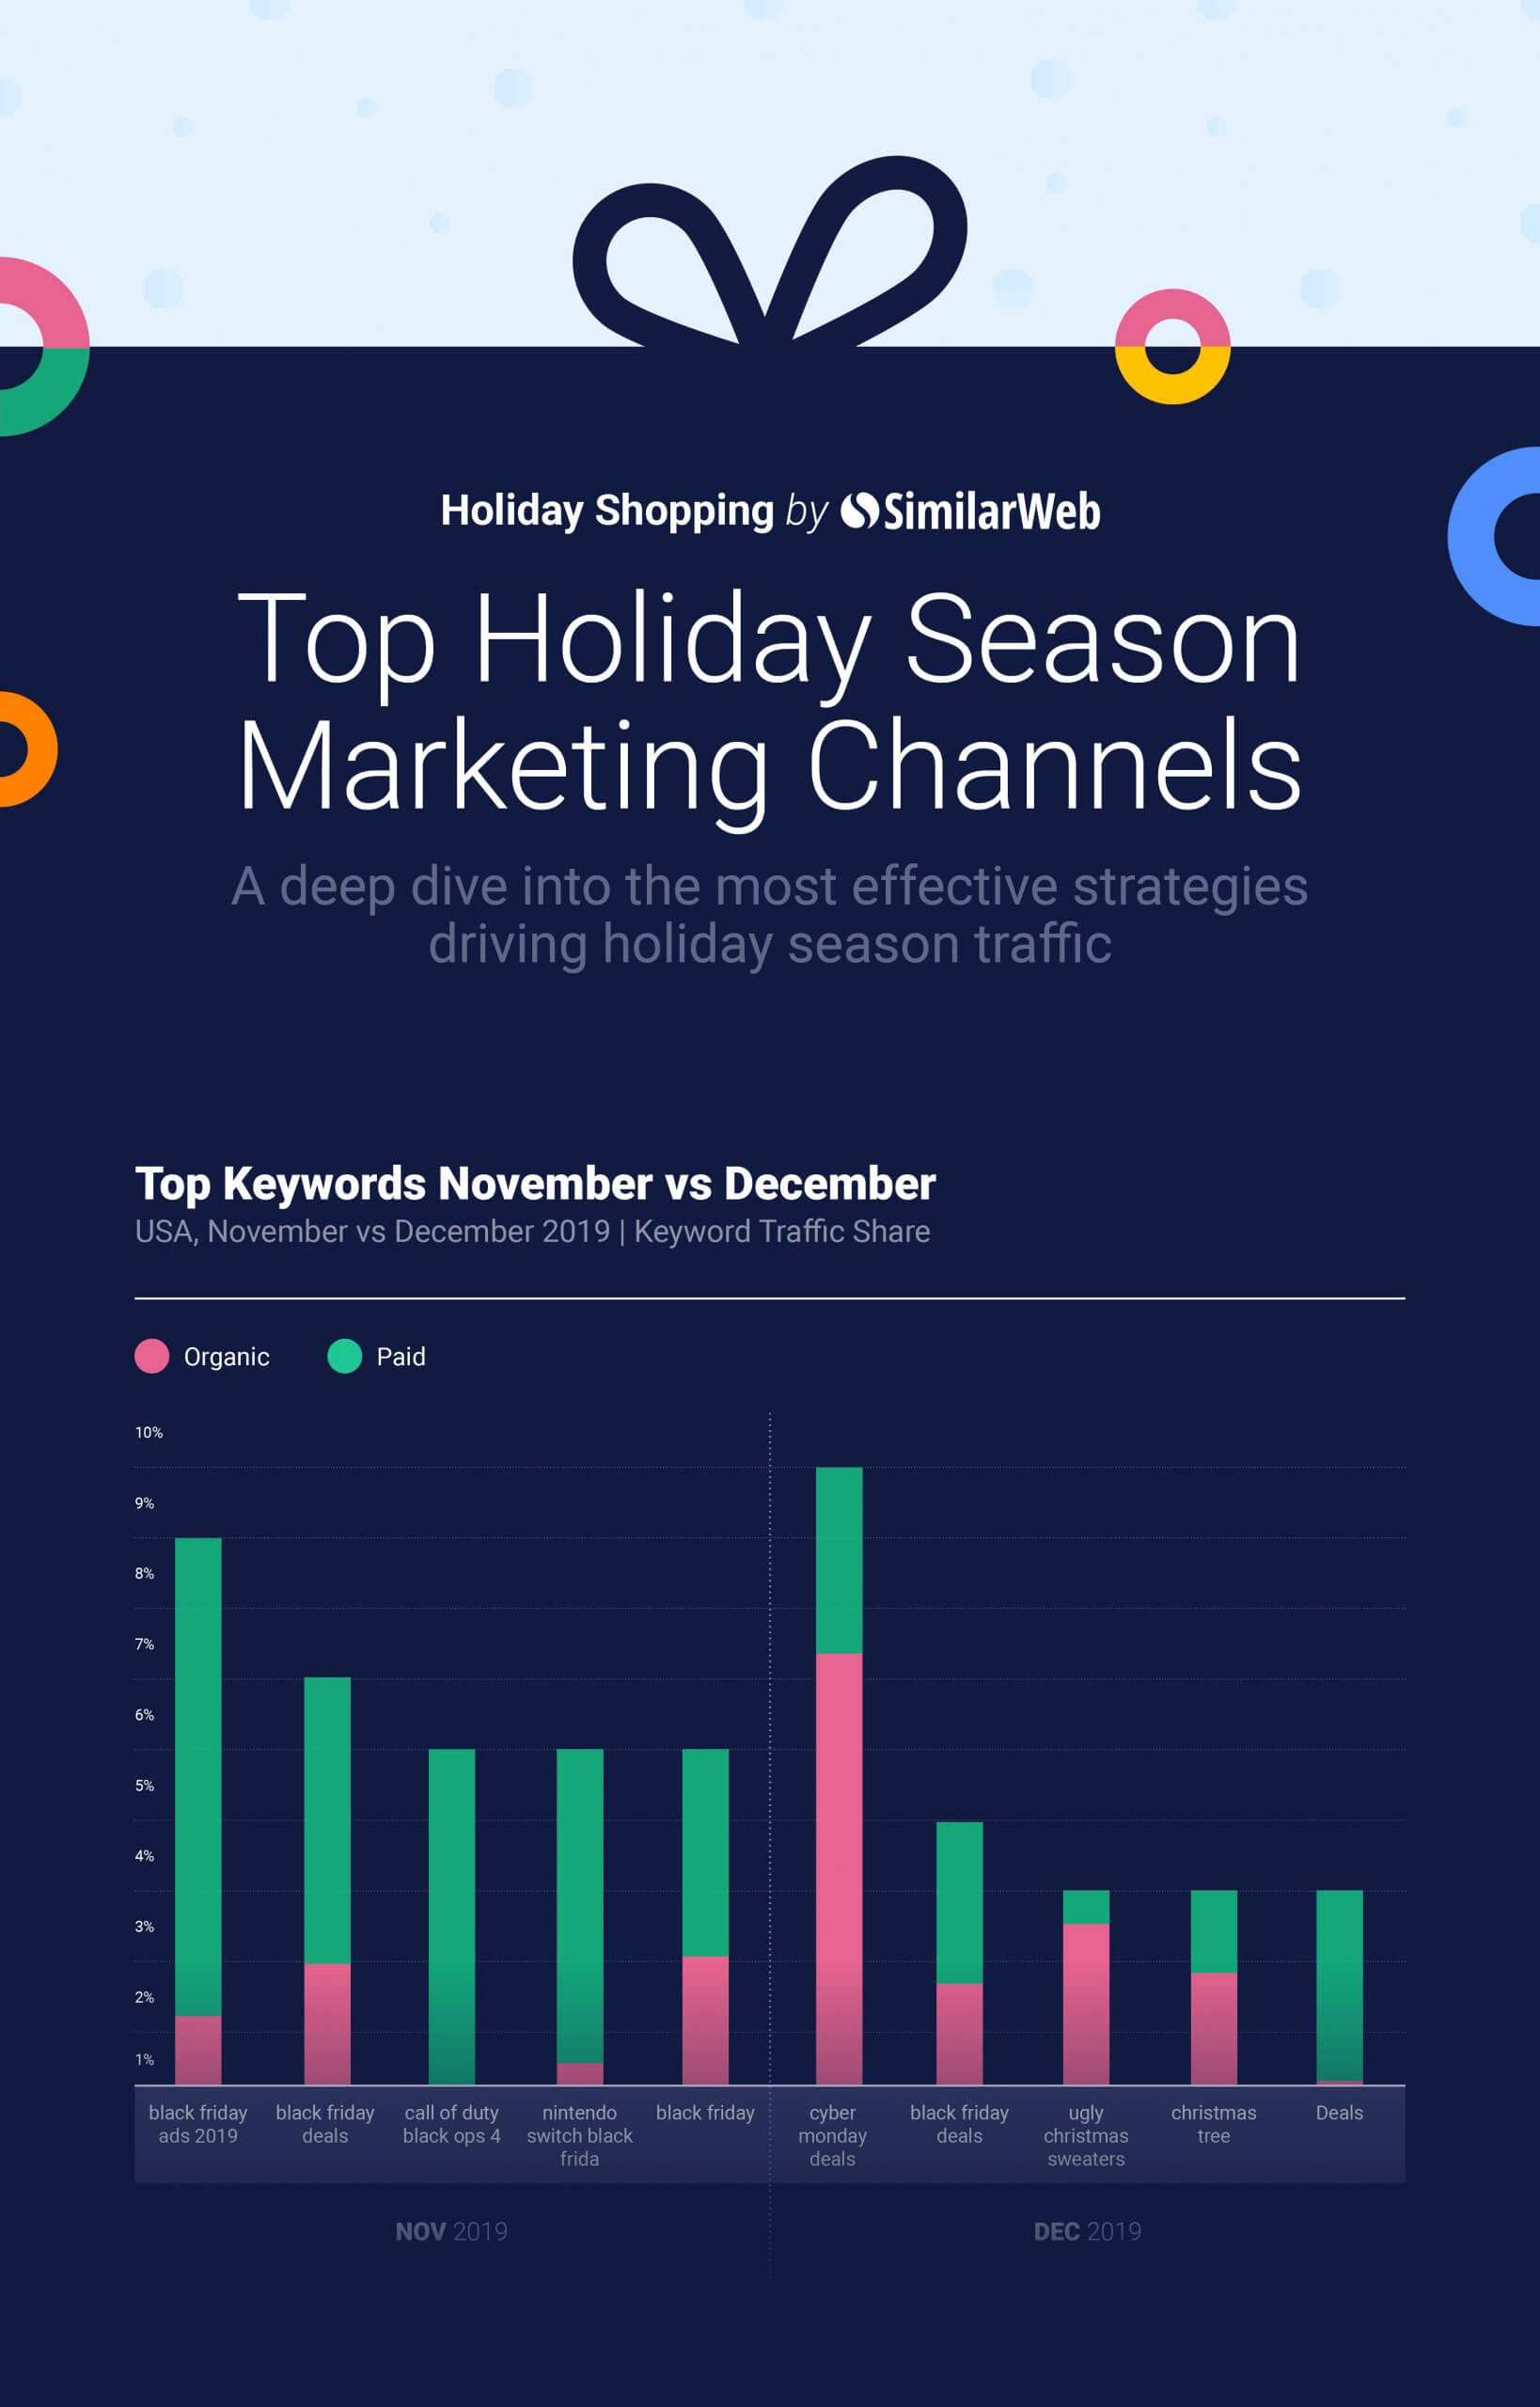 Holiday Marketing Channels